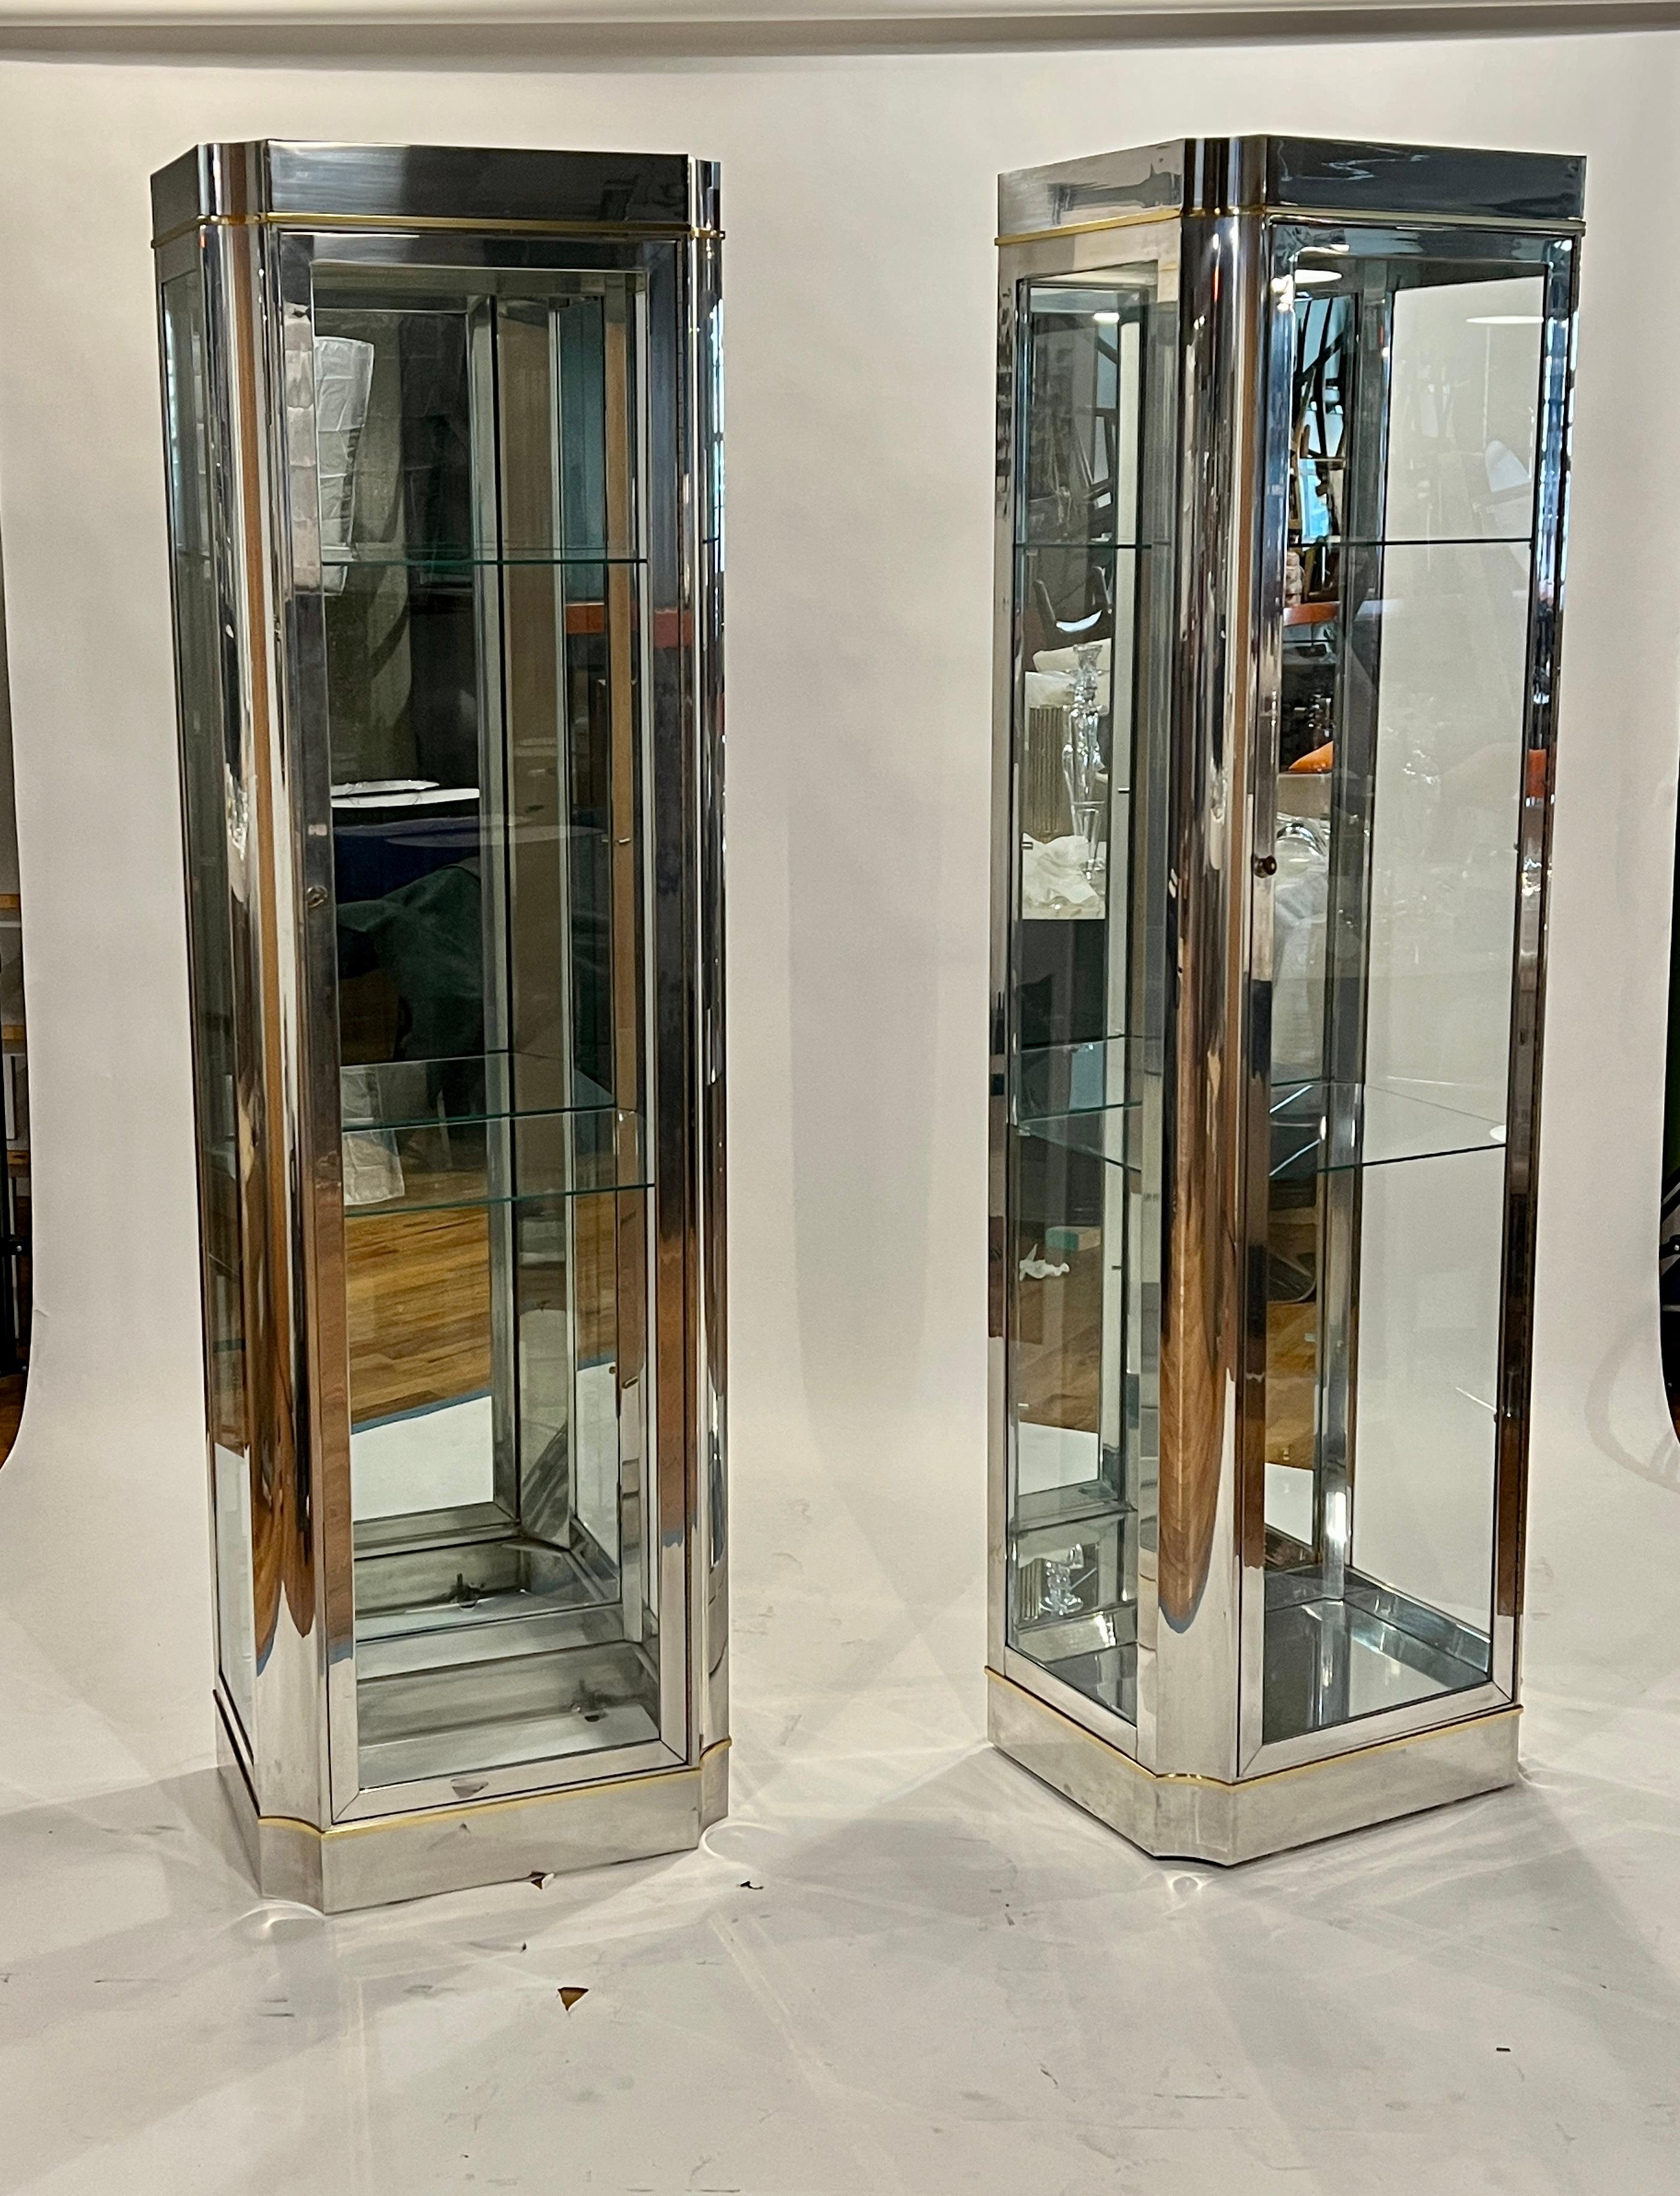 Pair of 20th century vitrines after Mastercraft made in chrome and glass with brass accents. Each cabinet features one door which opens to 5 glass shelves which may be removed if desired. The cabinets illuminated from above to showcase your